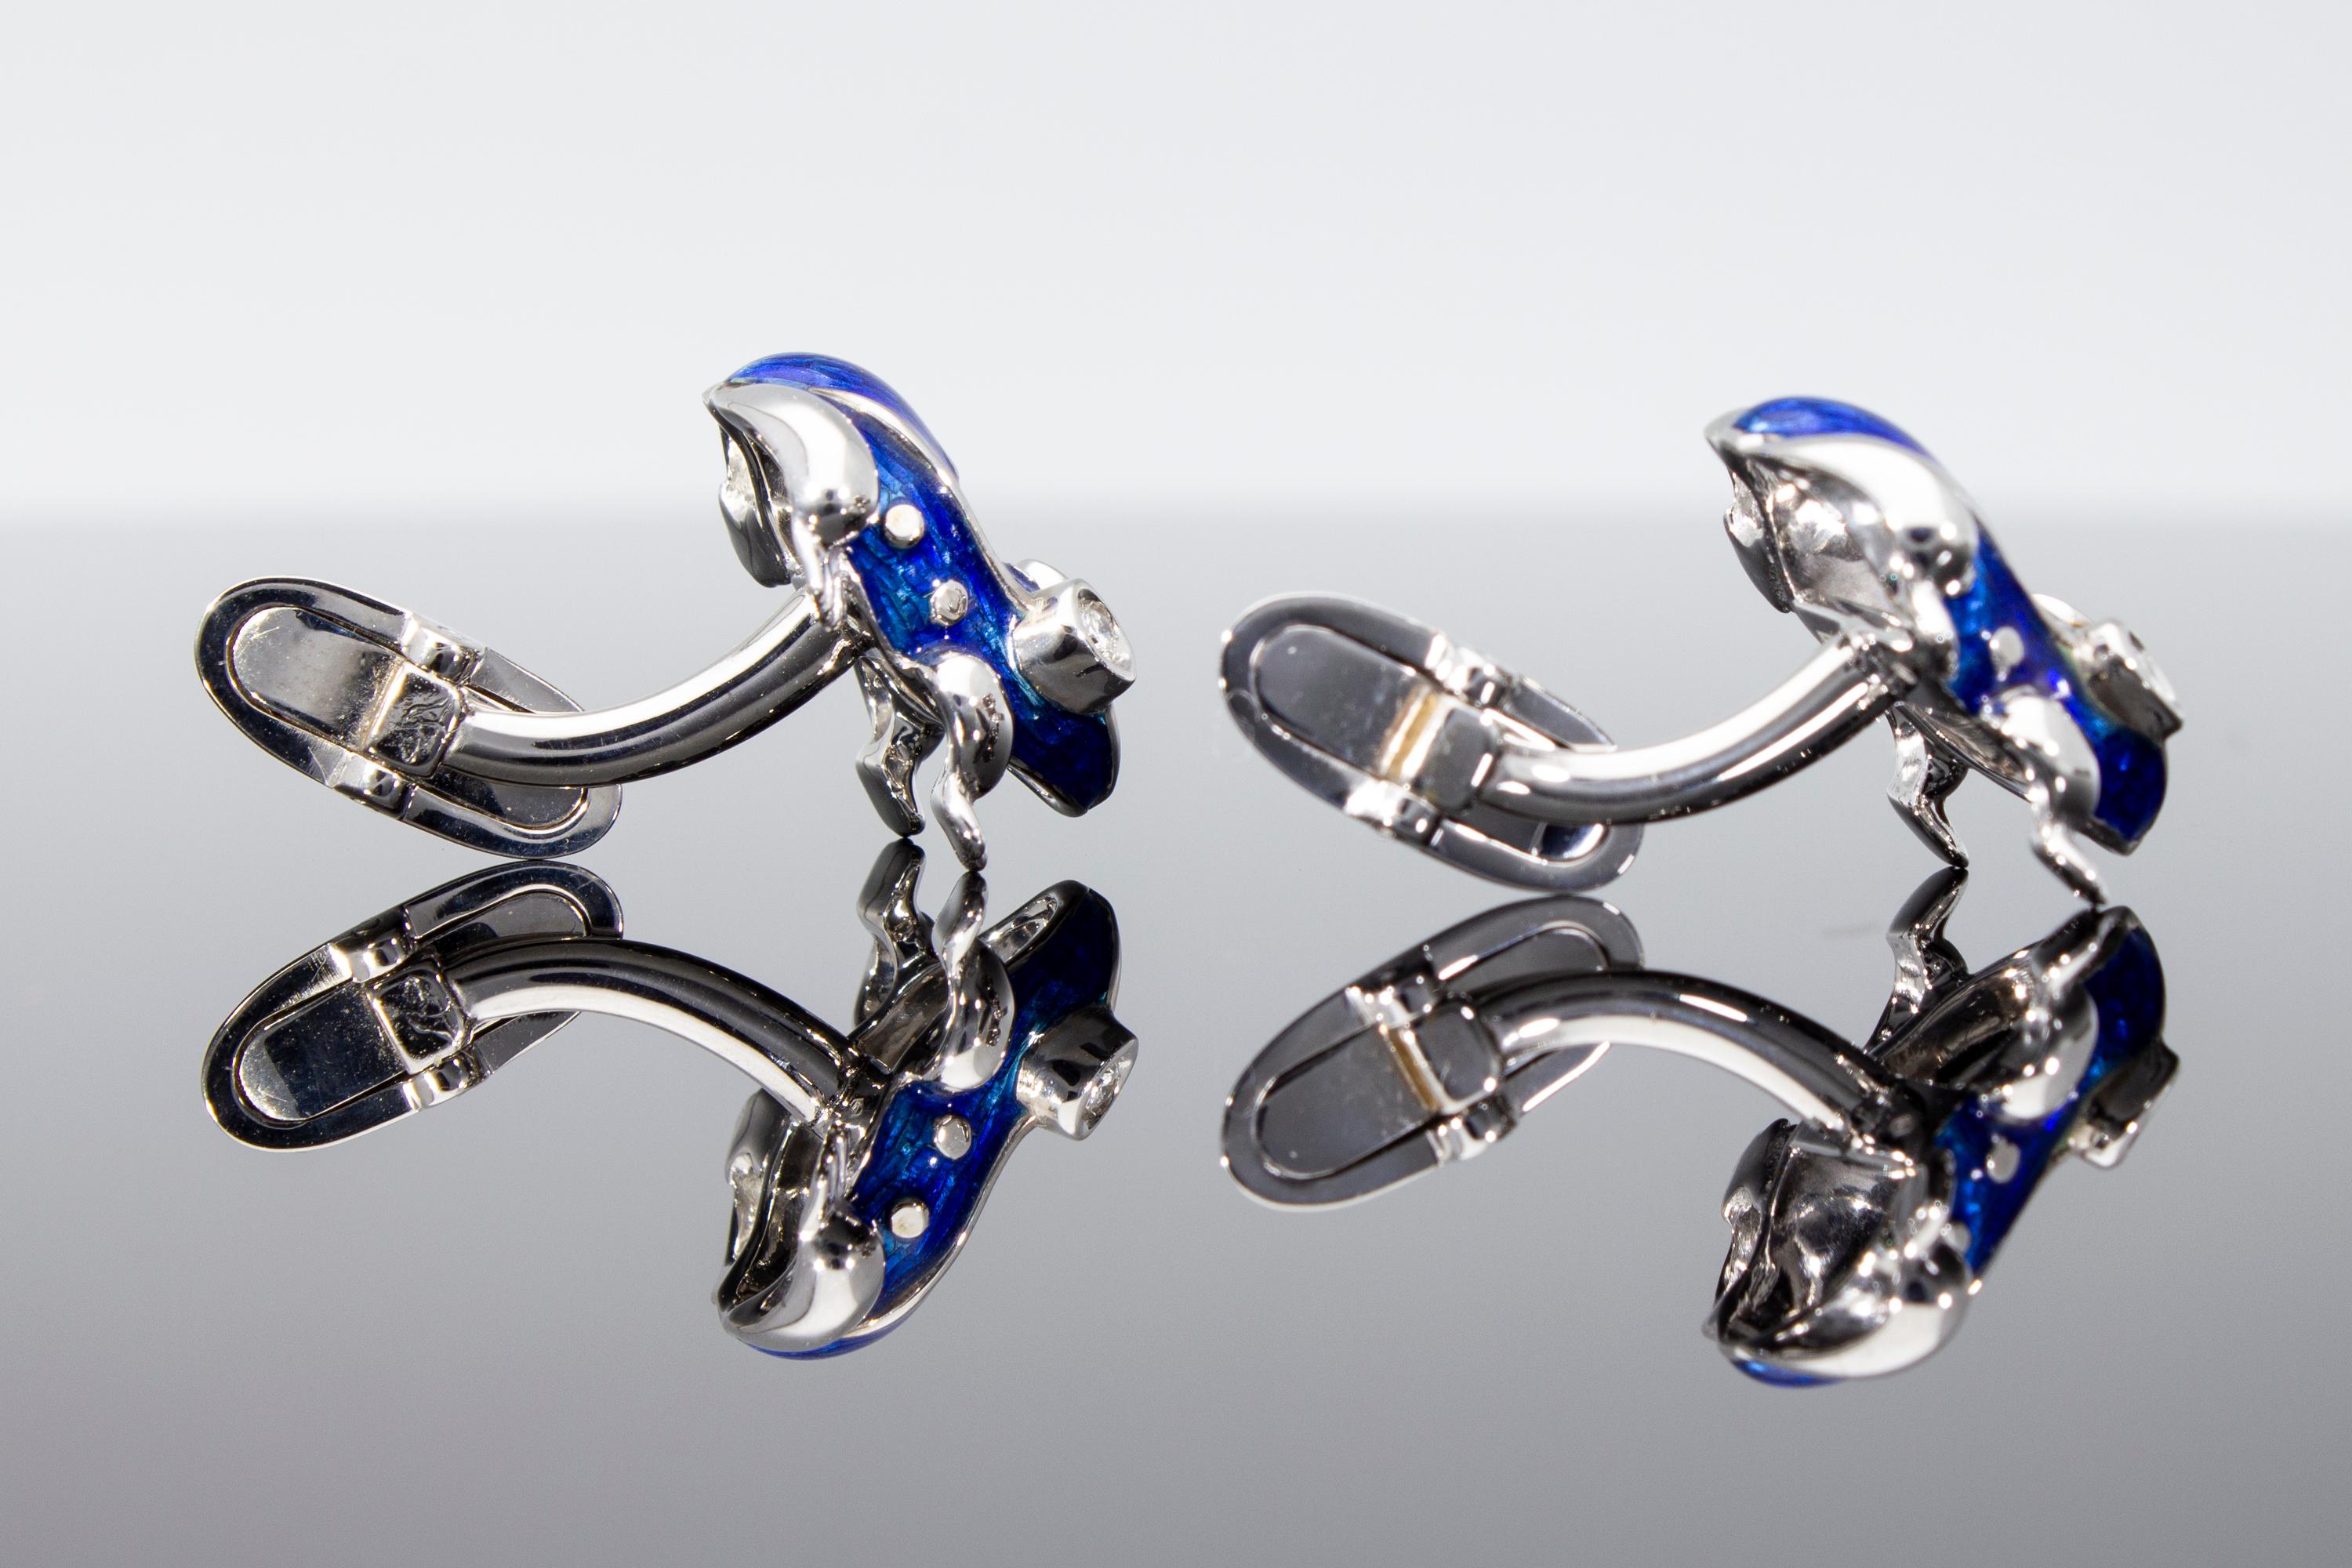 18 Kt White Gold with Blu Enamel Diamonds Frog Cufflinks Handcraft Made in Italy For Sale 14